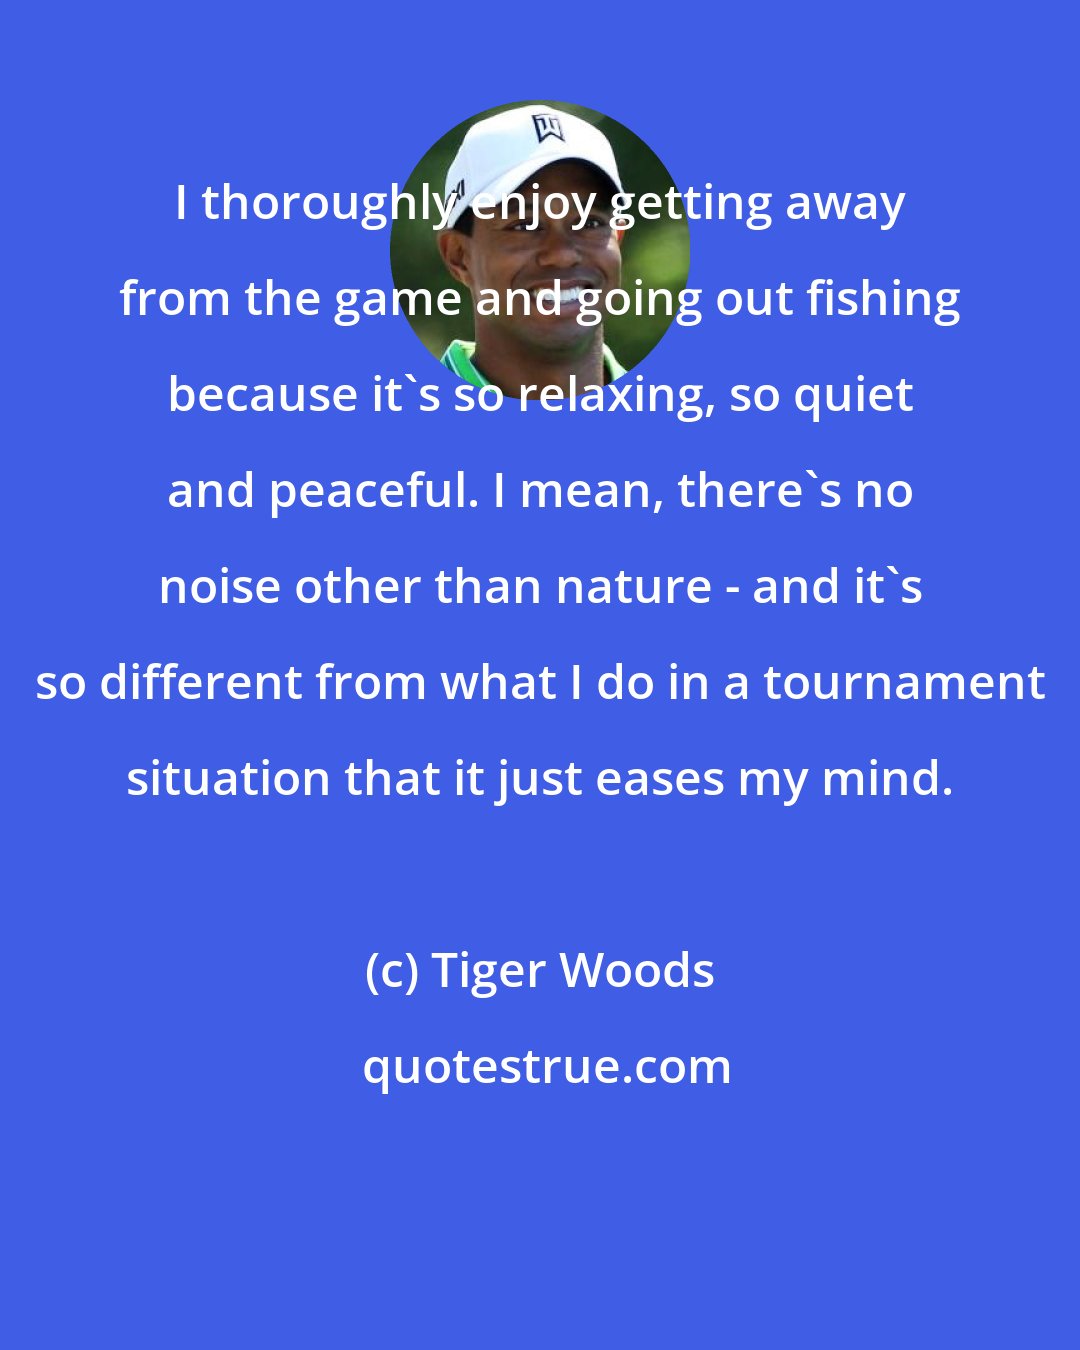 Tiger Woods: I thoroughly enjoy getting away from the game and going out fishing because it's so relaxing, so quiet and peaceful. I mean, there's no noise other than nature - and it's so different from what I do in a tournament situation that it just eases my mind.